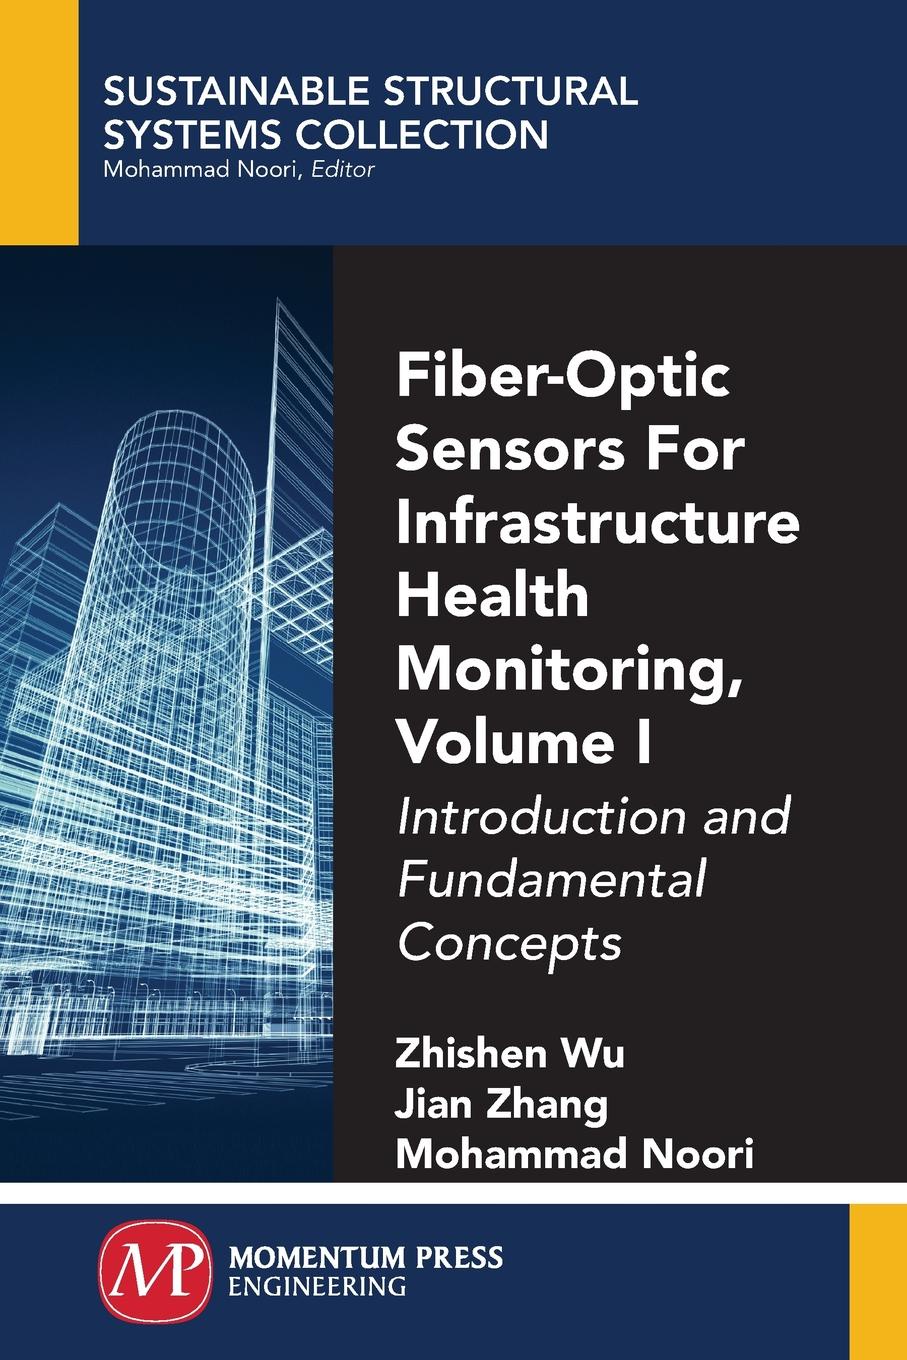 Fiber-Optic Sensors For Infrastructure Health Monitoring, Volume I. Introduction and Fundamental Concepts